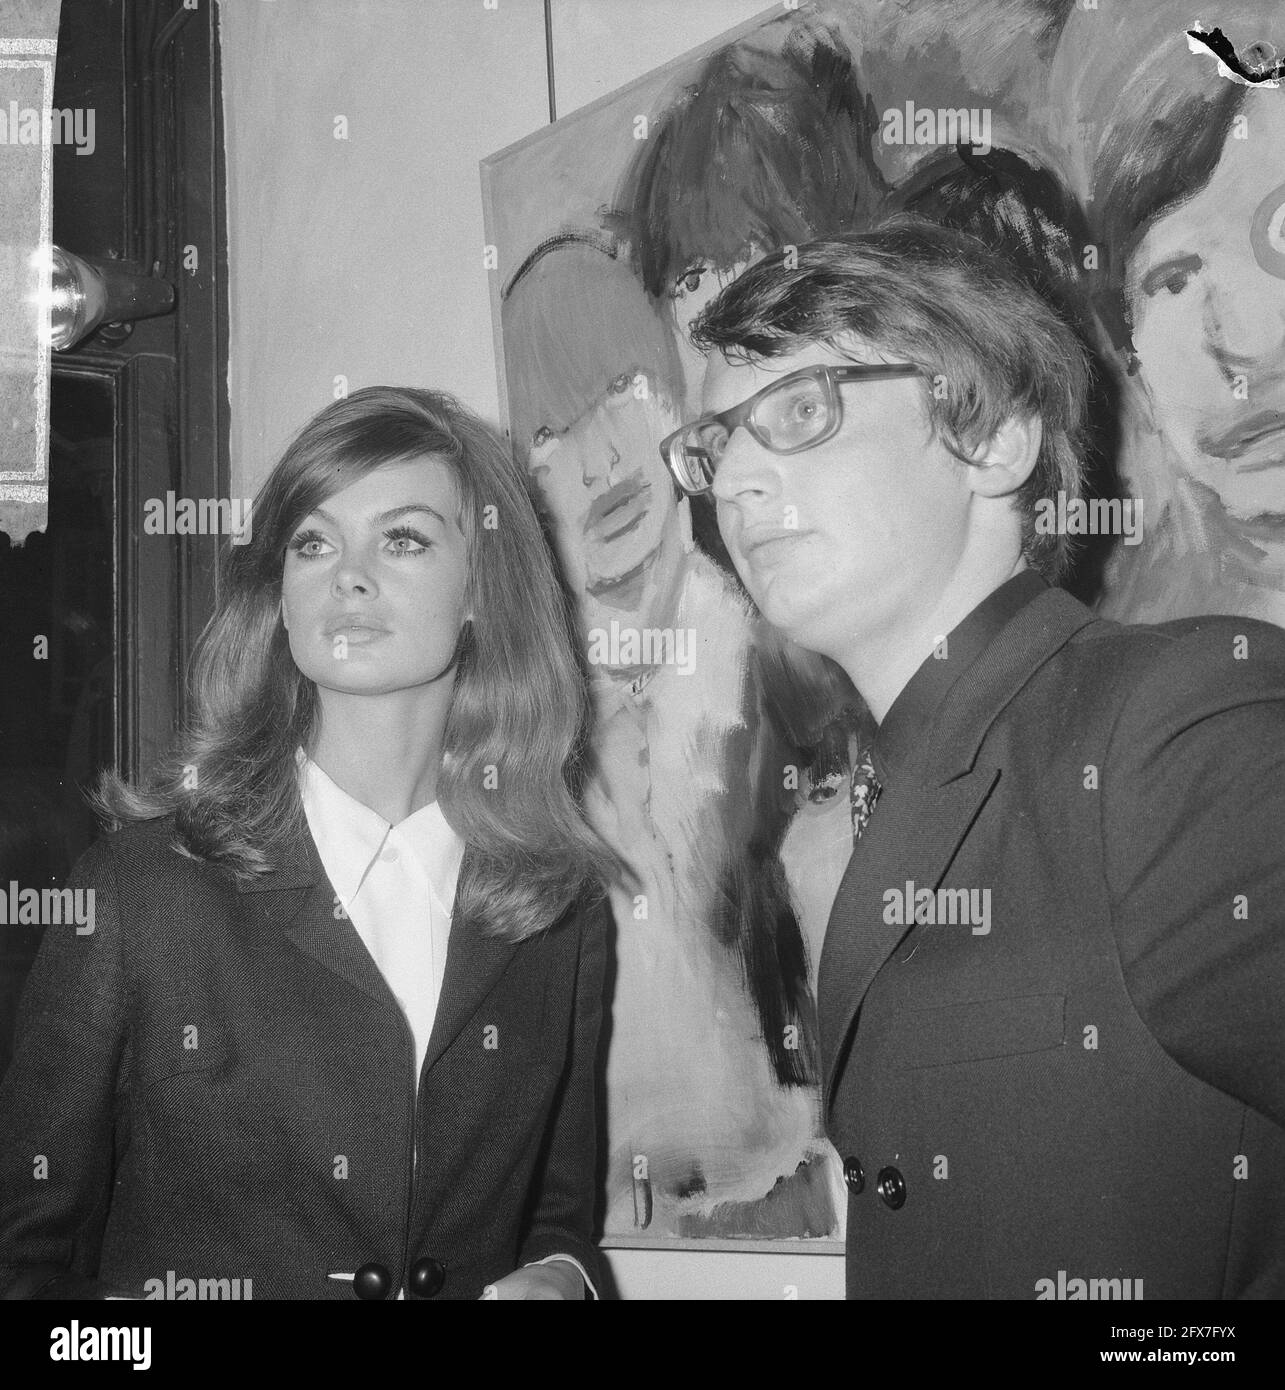 Jean Shrimpton (fashion model) exhibition opened at Galerie Krikhaar in Amsterdam, September 17, 1965, exhibitions, The Netherlands, 20th century press agency photo, news to remember, documentary, historic photography 1945-1990, visual stories, human history of the Twentieth Century, capturing moments in time Stock Photo